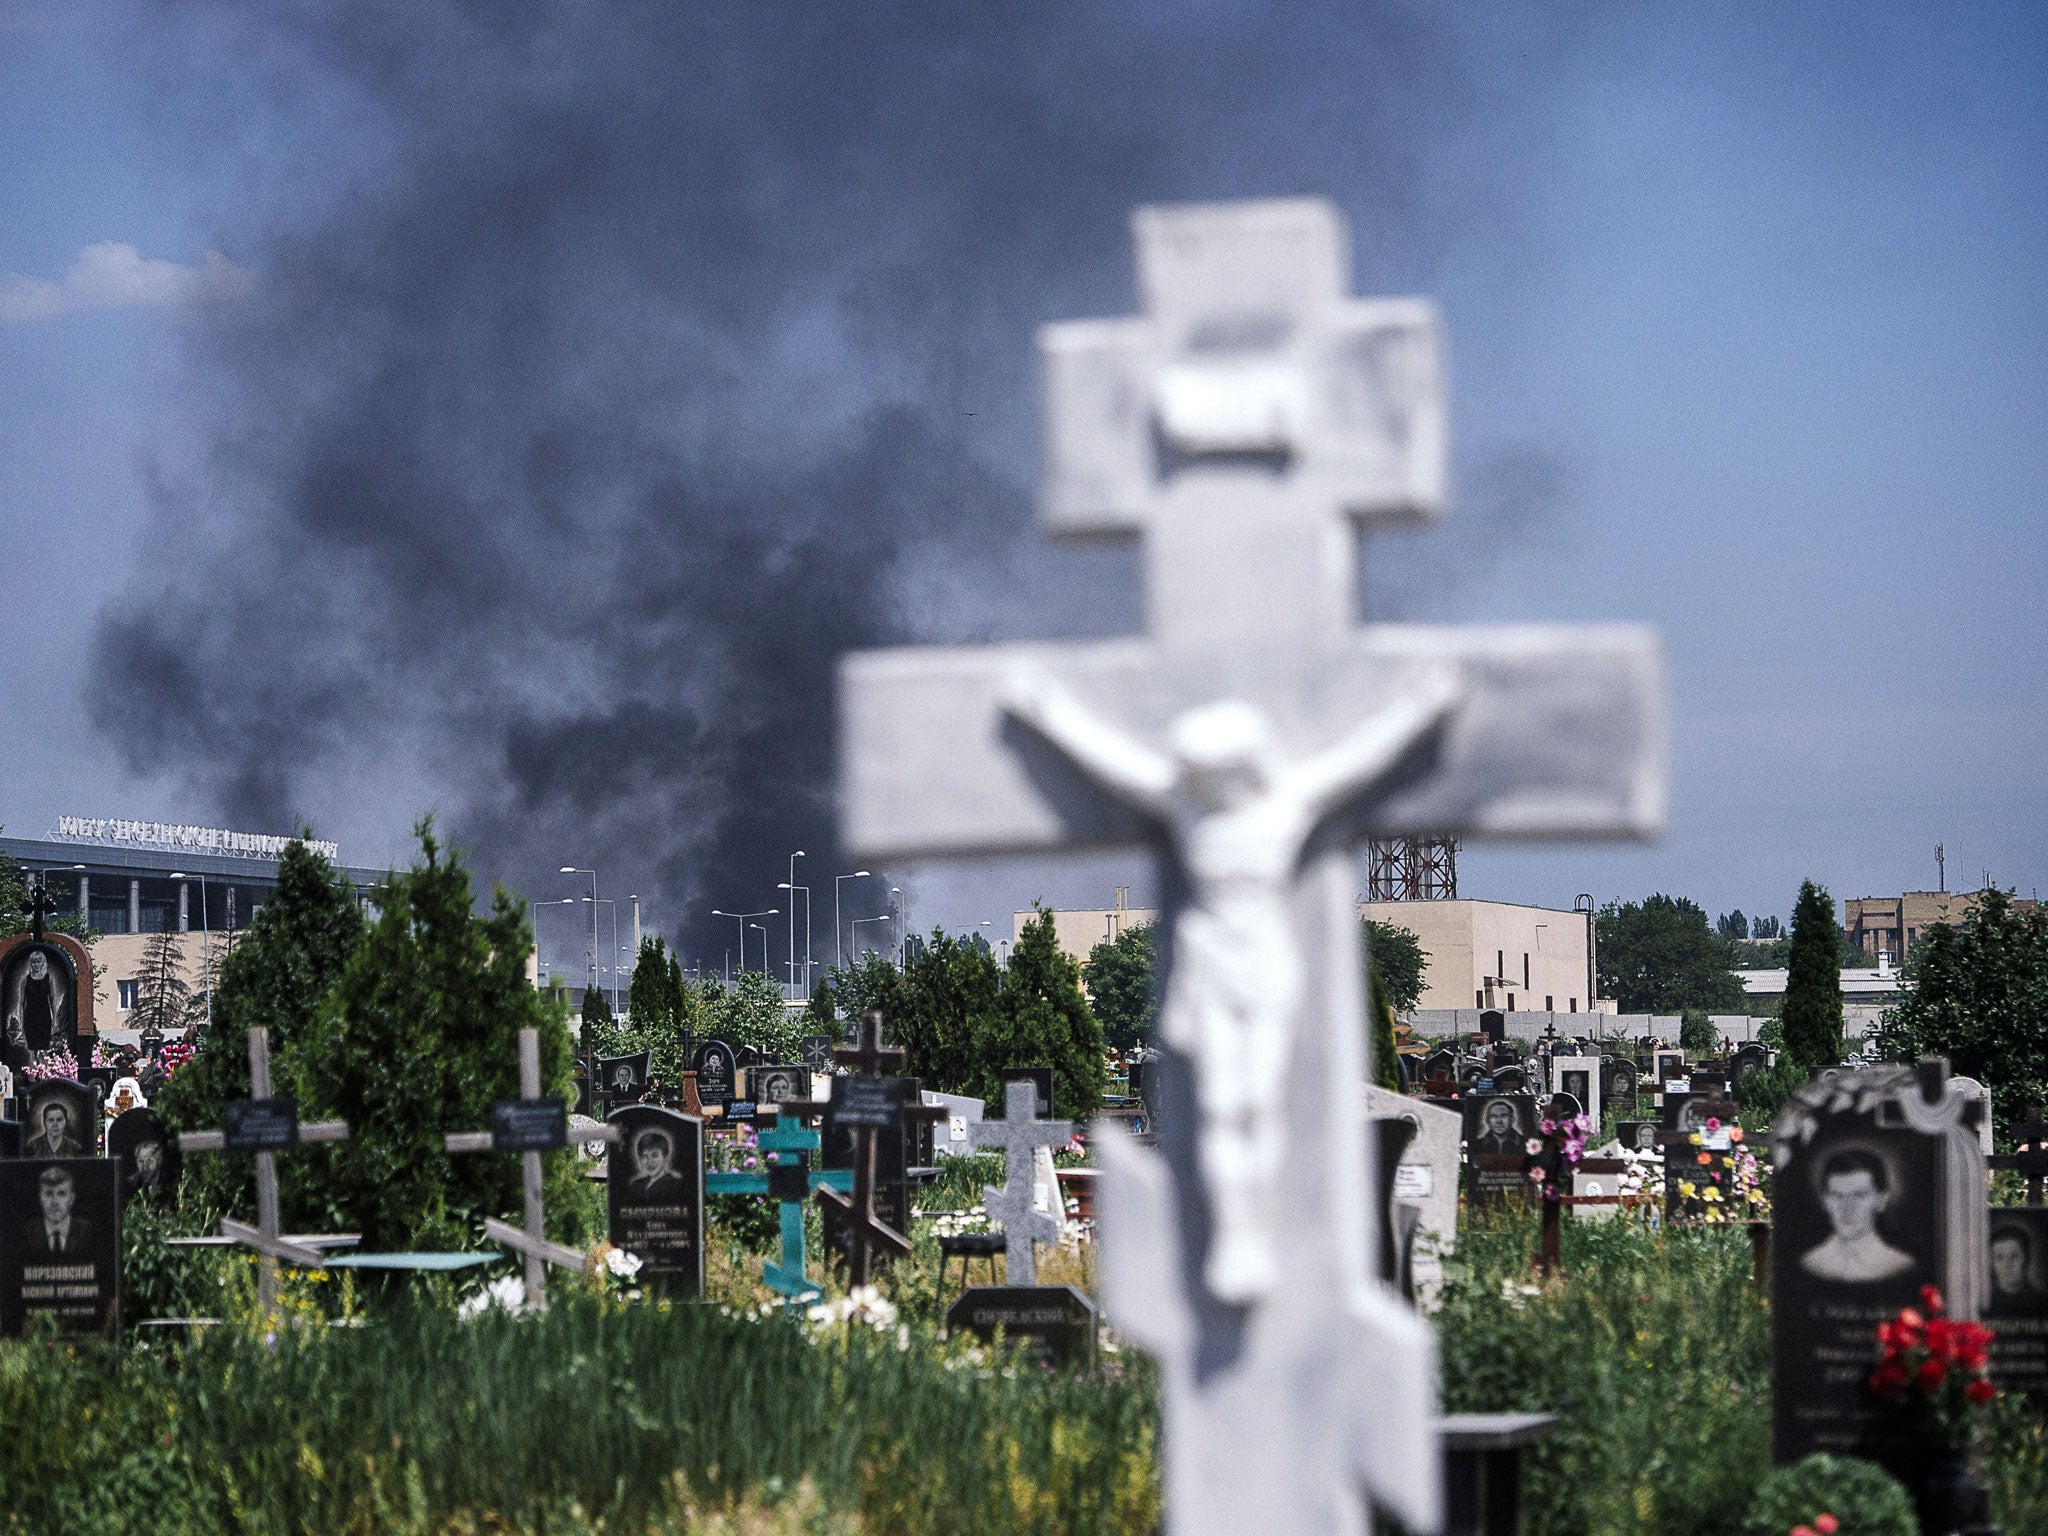 Black smoke billows from Donetsk international airport, seen behind a cemetery, during heavy gun battle between the Ukrainian army and pro-Russian militants in the eastern Ukrainian city of Donetsk on May 26, 2014